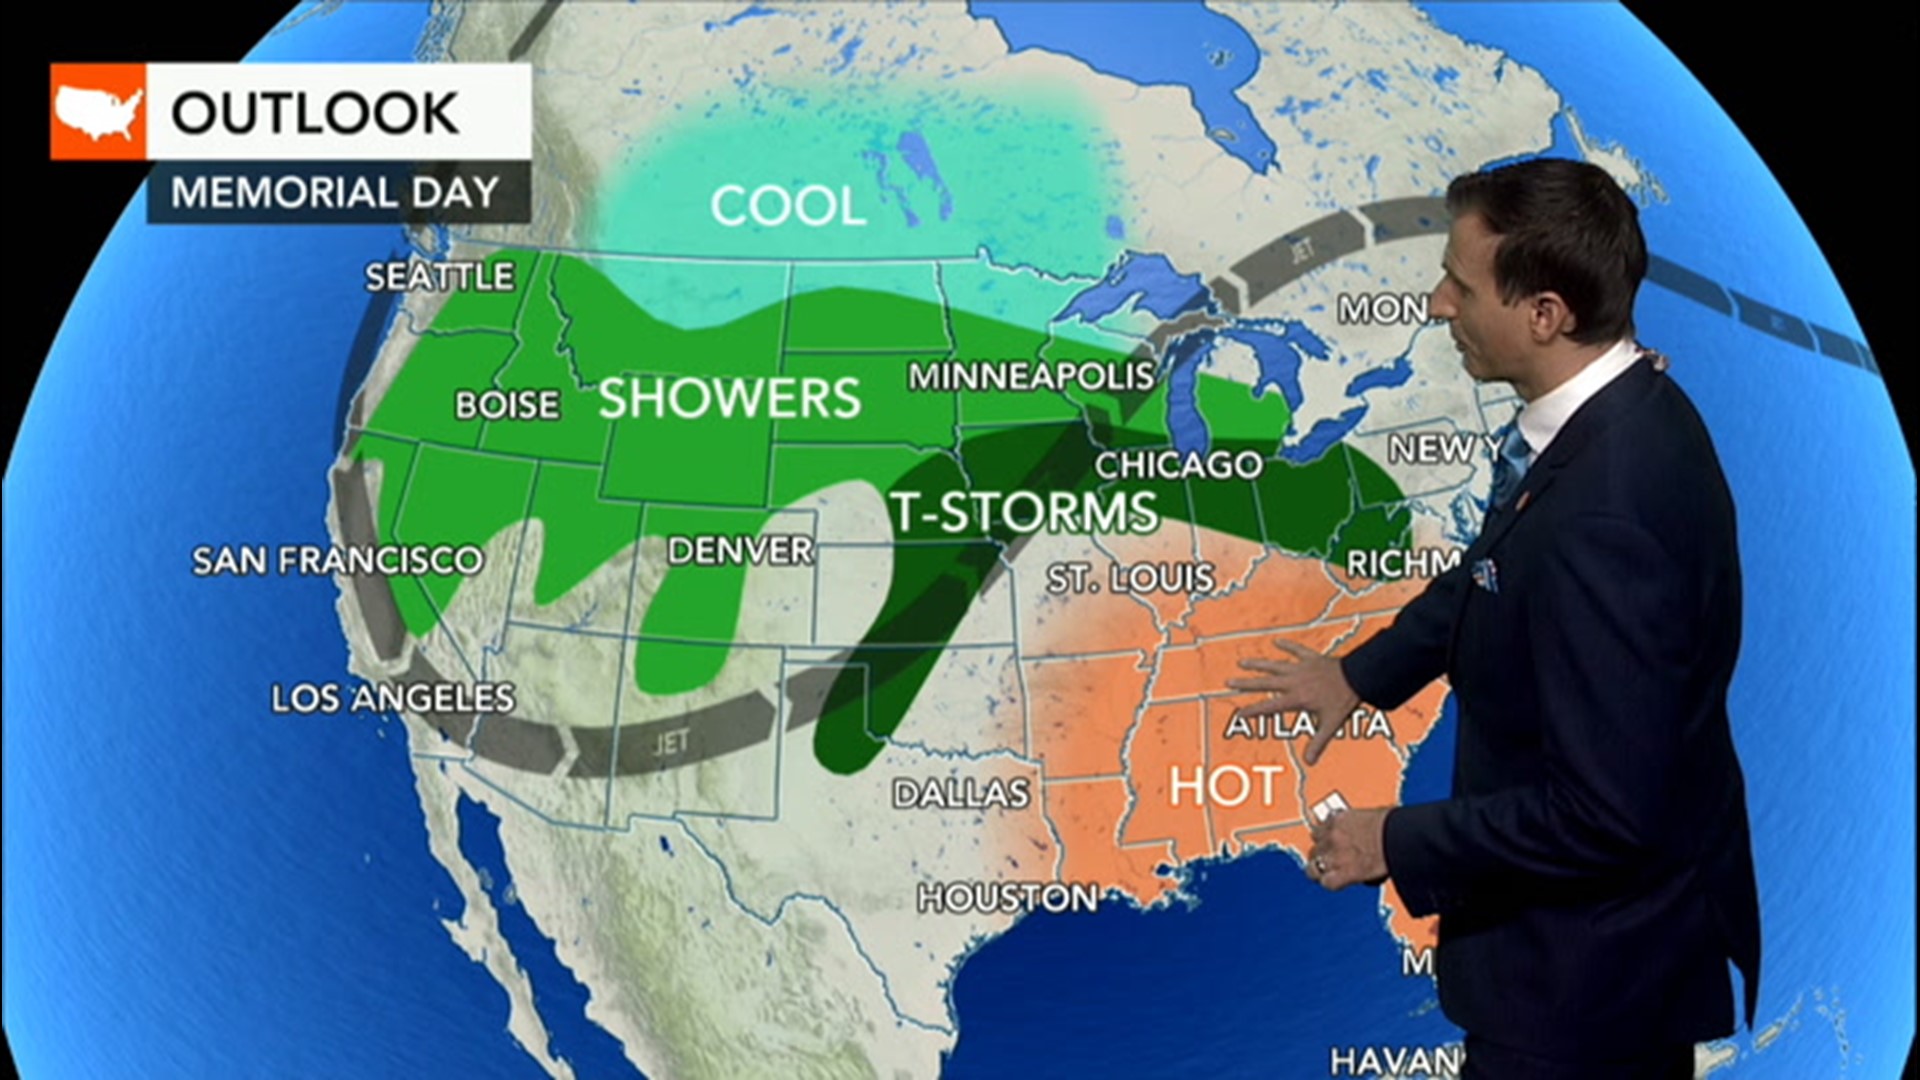 Severe storms could pose travel impacts to millions of Americans in the central U.S ahead of the holiday.